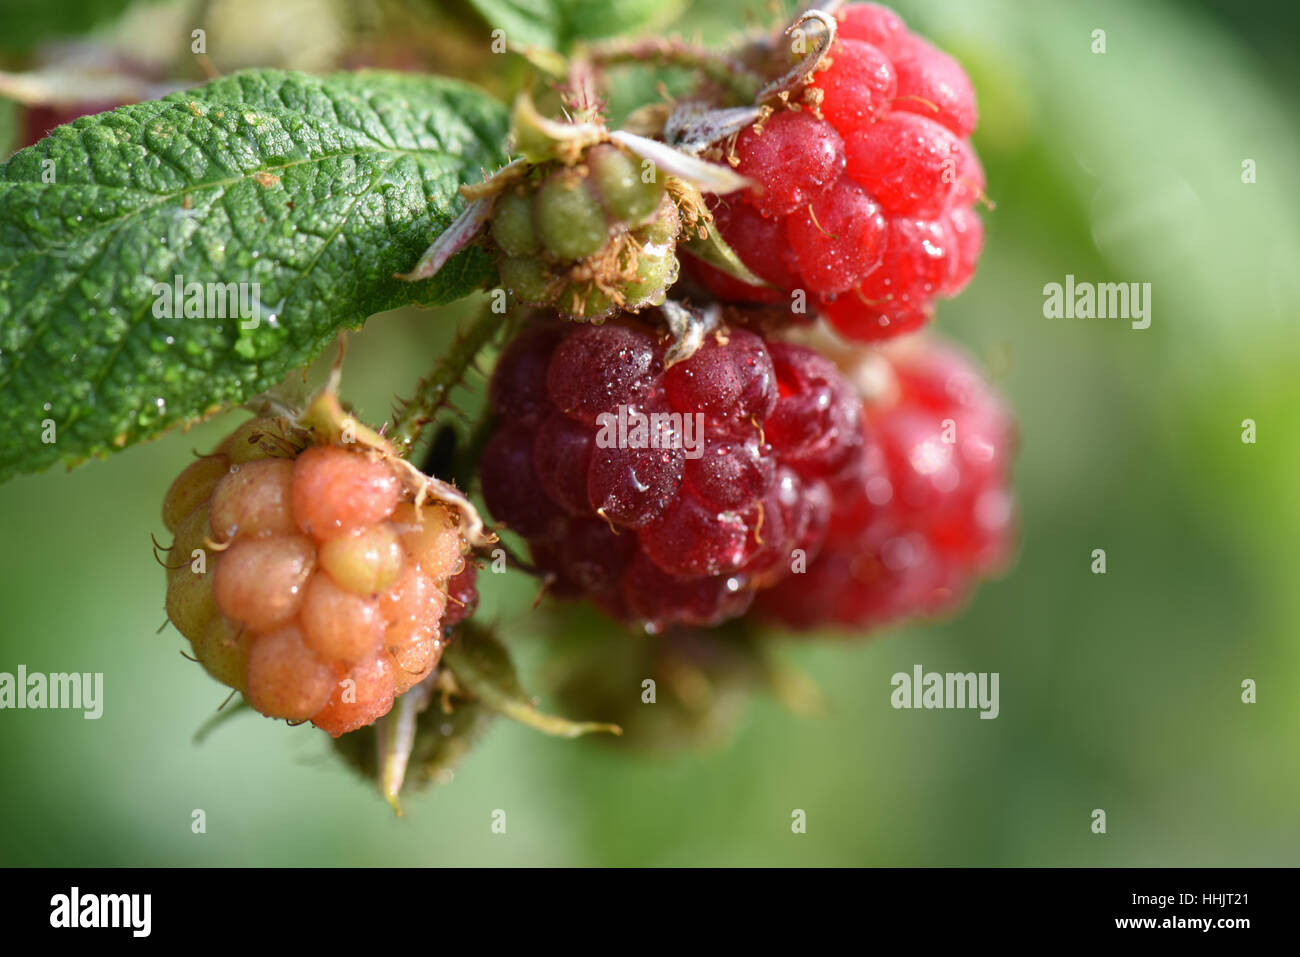 - and stock images Raspberries hi-res fruit Alamy photography stages